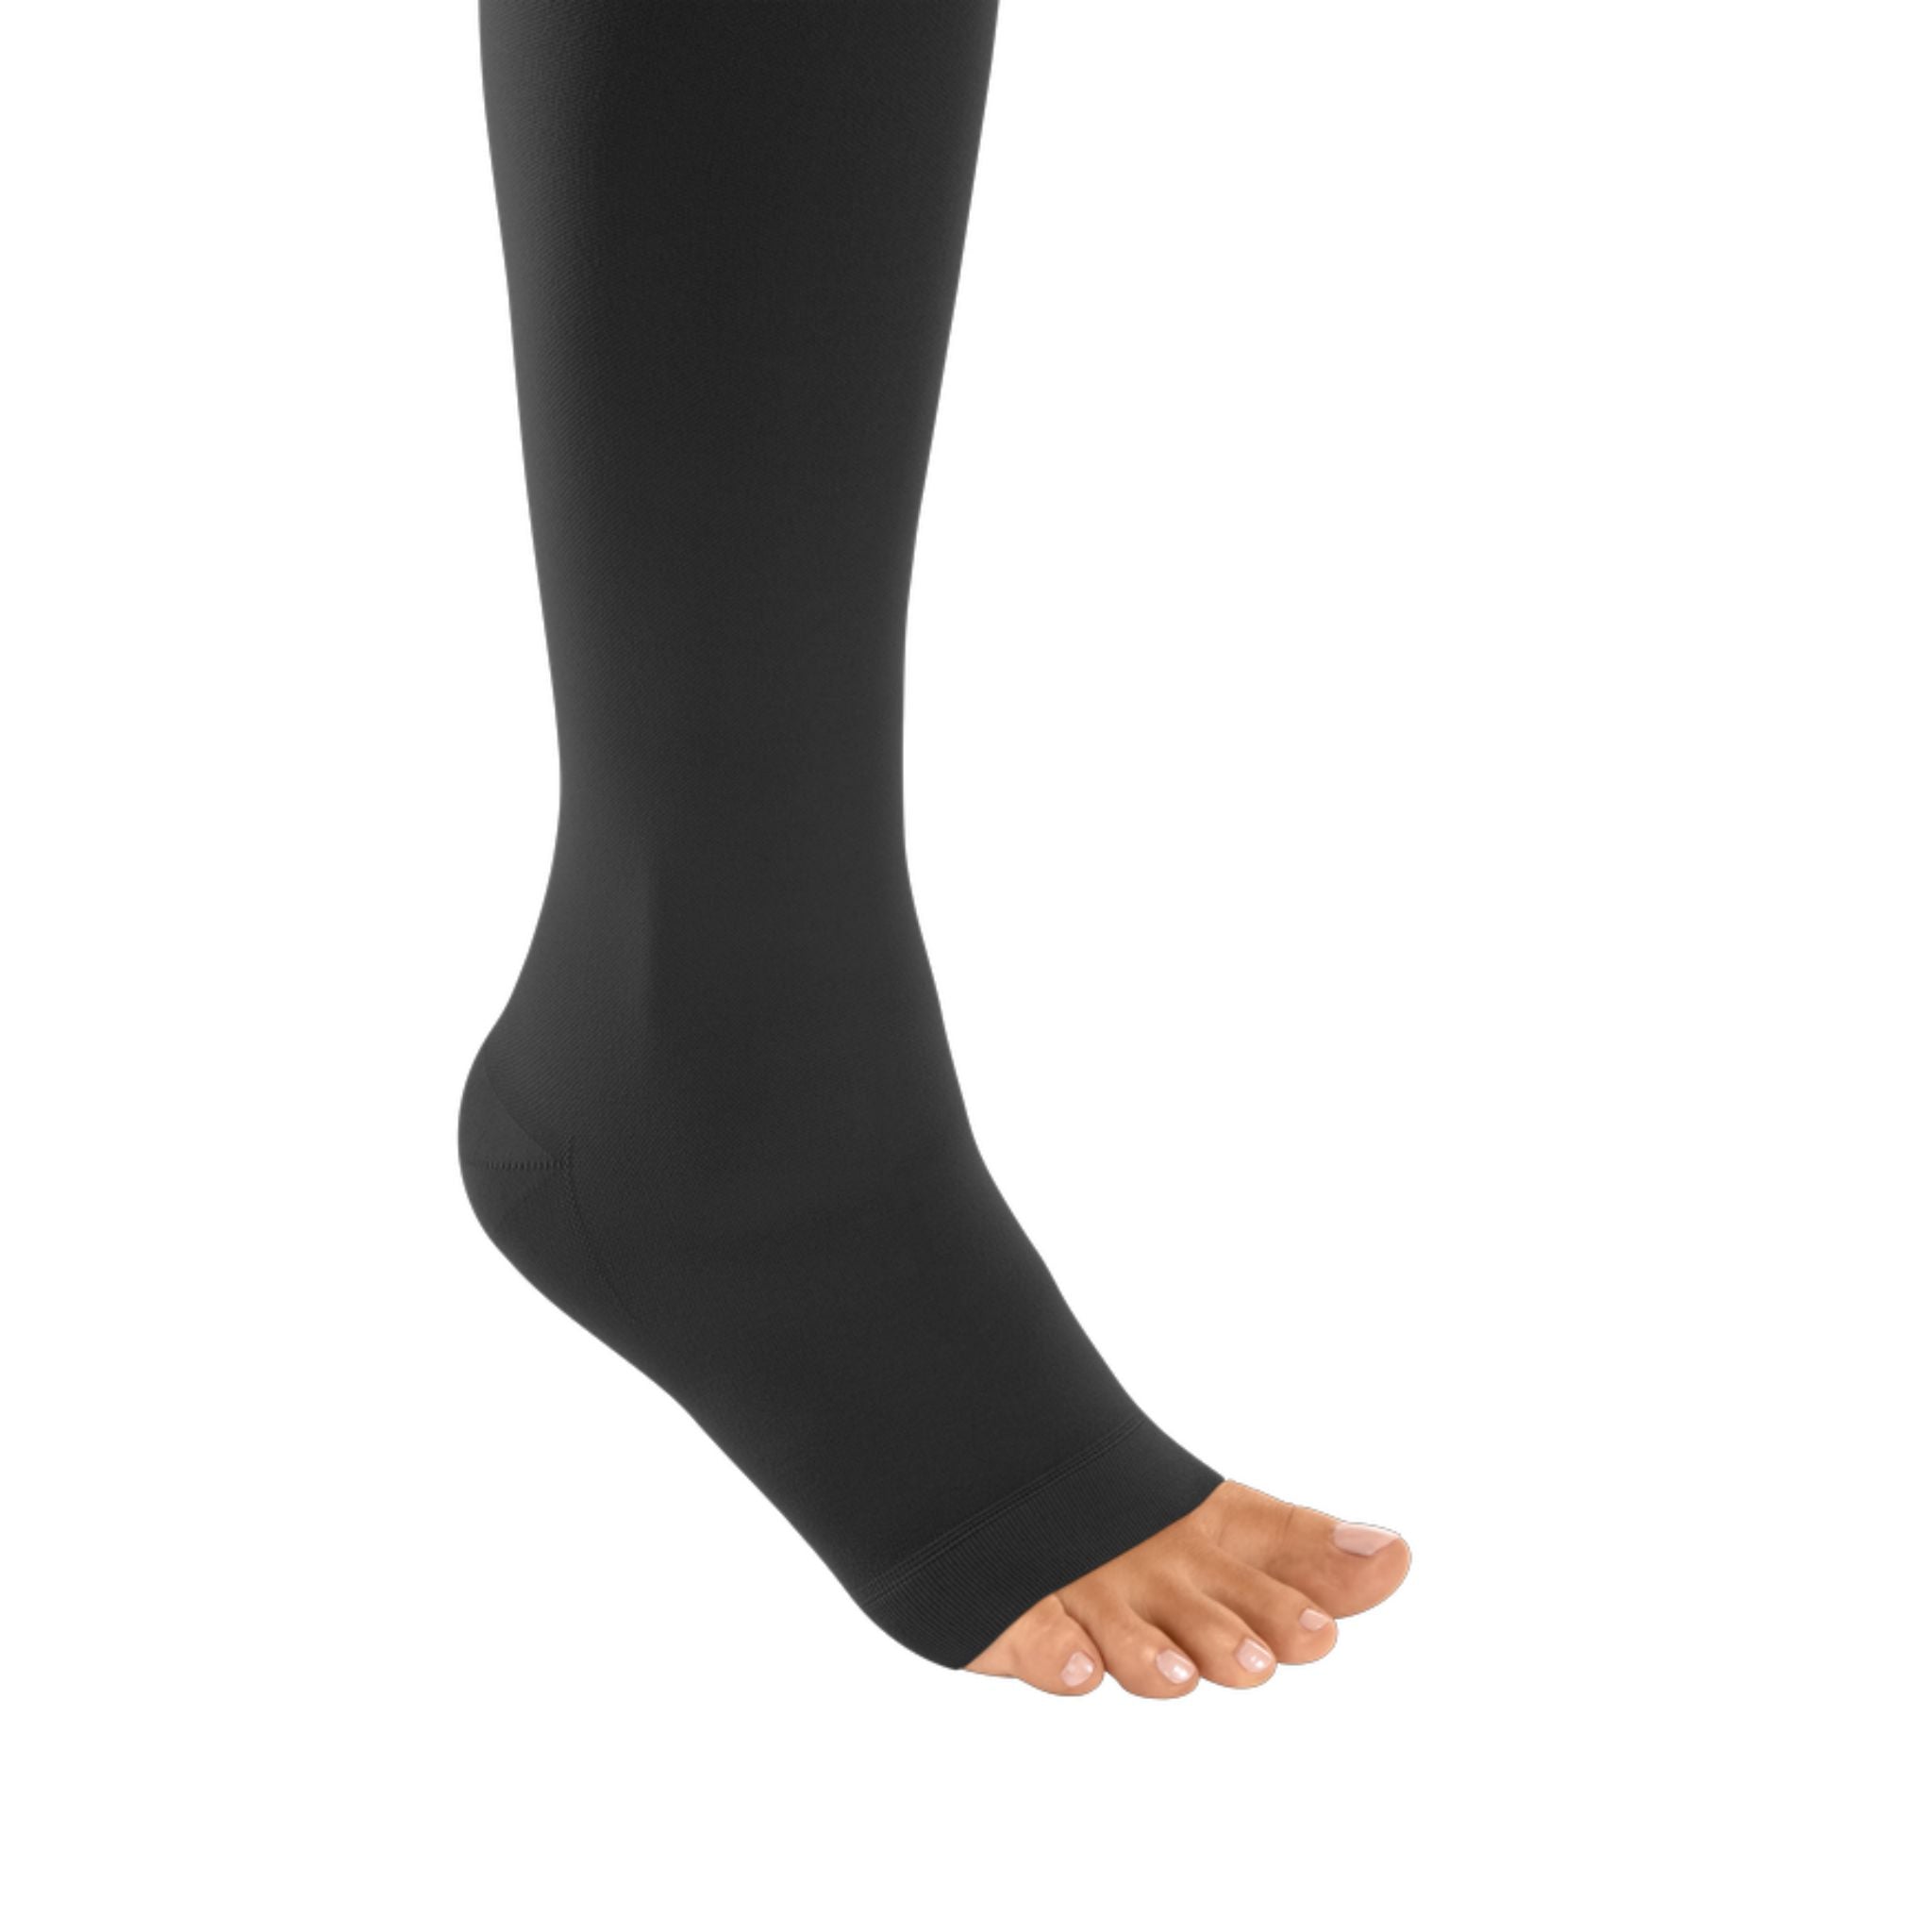 Compression Stockings  Thigh High  Open Toe  Sensitive Topband  Black  mediven cotton